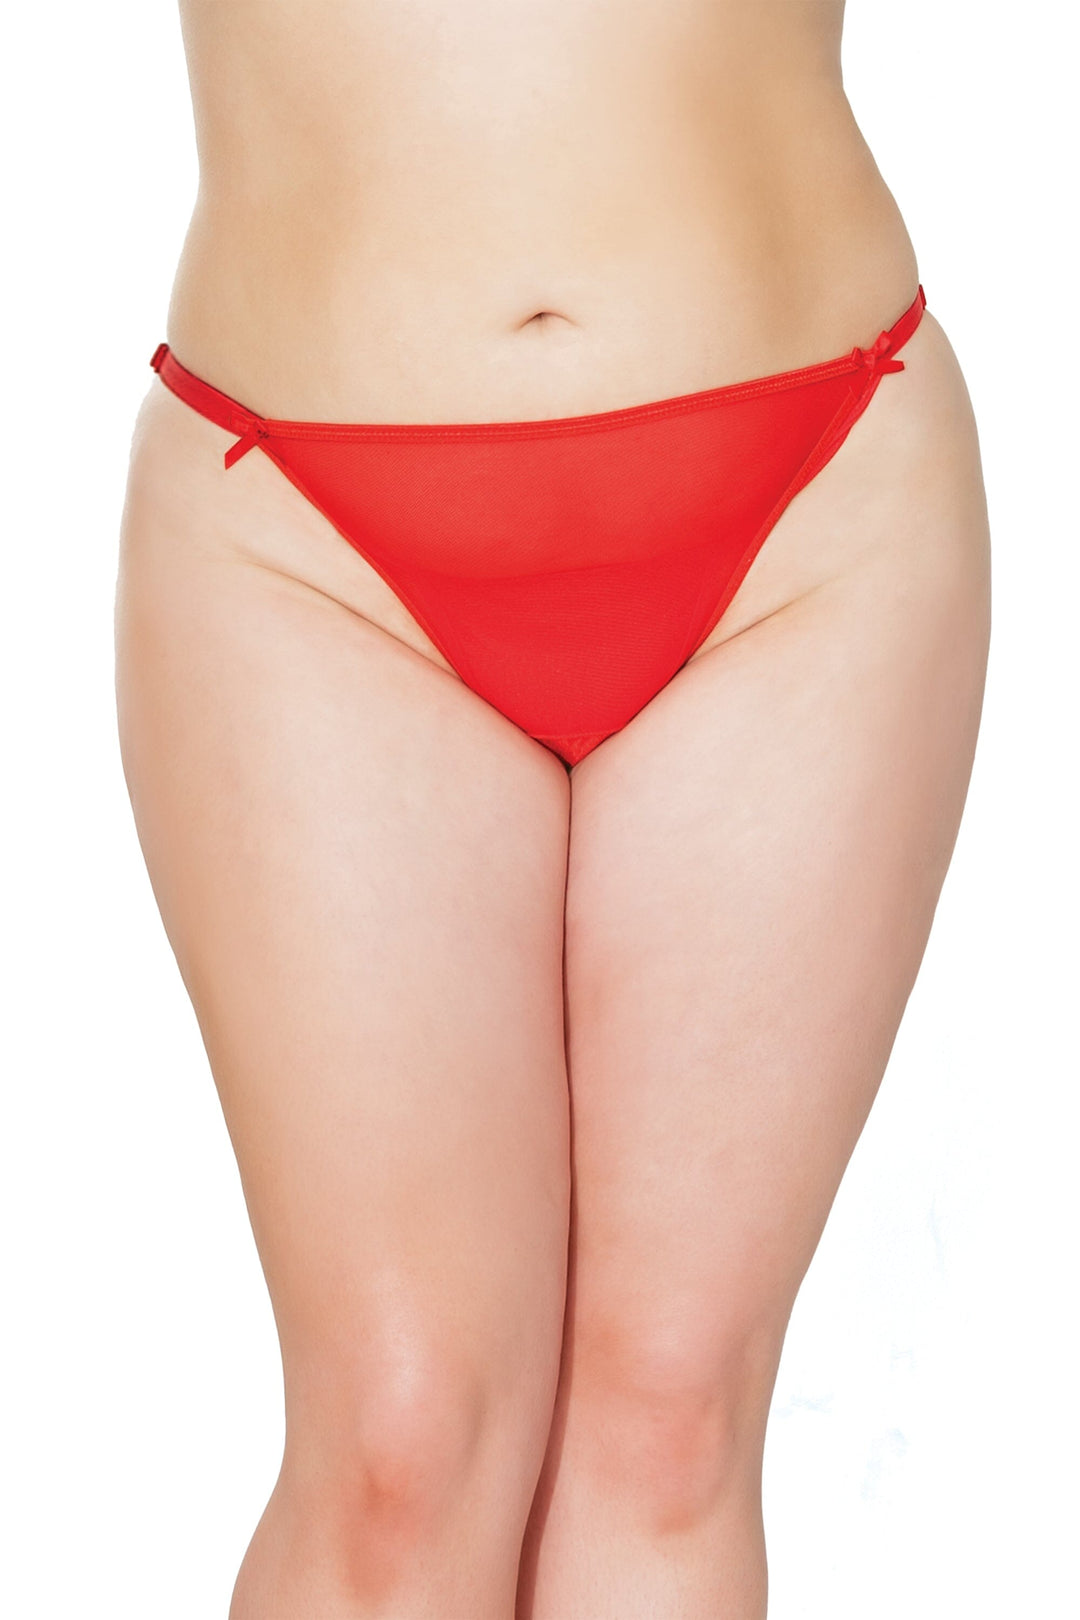 Crotchless Ruffle Panty | Plus Size-Panties-Coquette-Red-Q-SEXYSHOES.COM